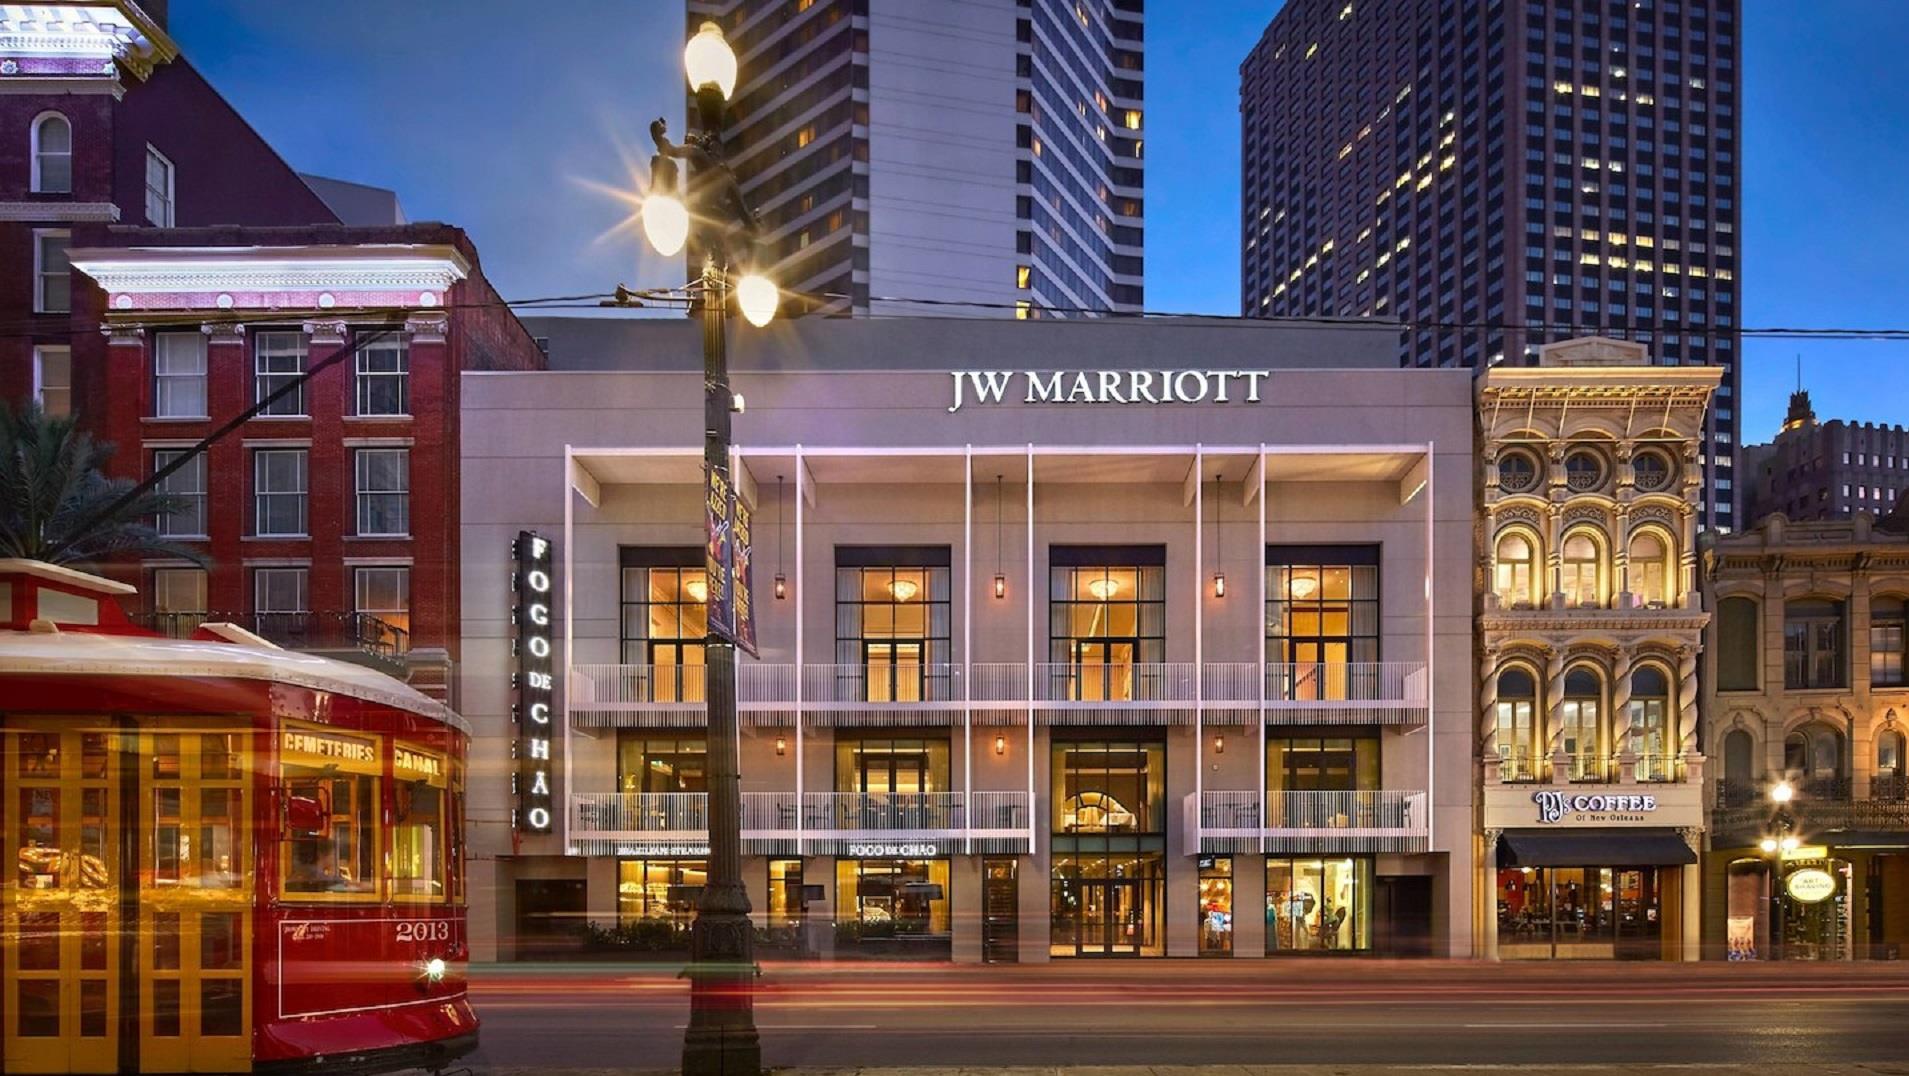 JW Marriott New Orleans in New Orleans, LA